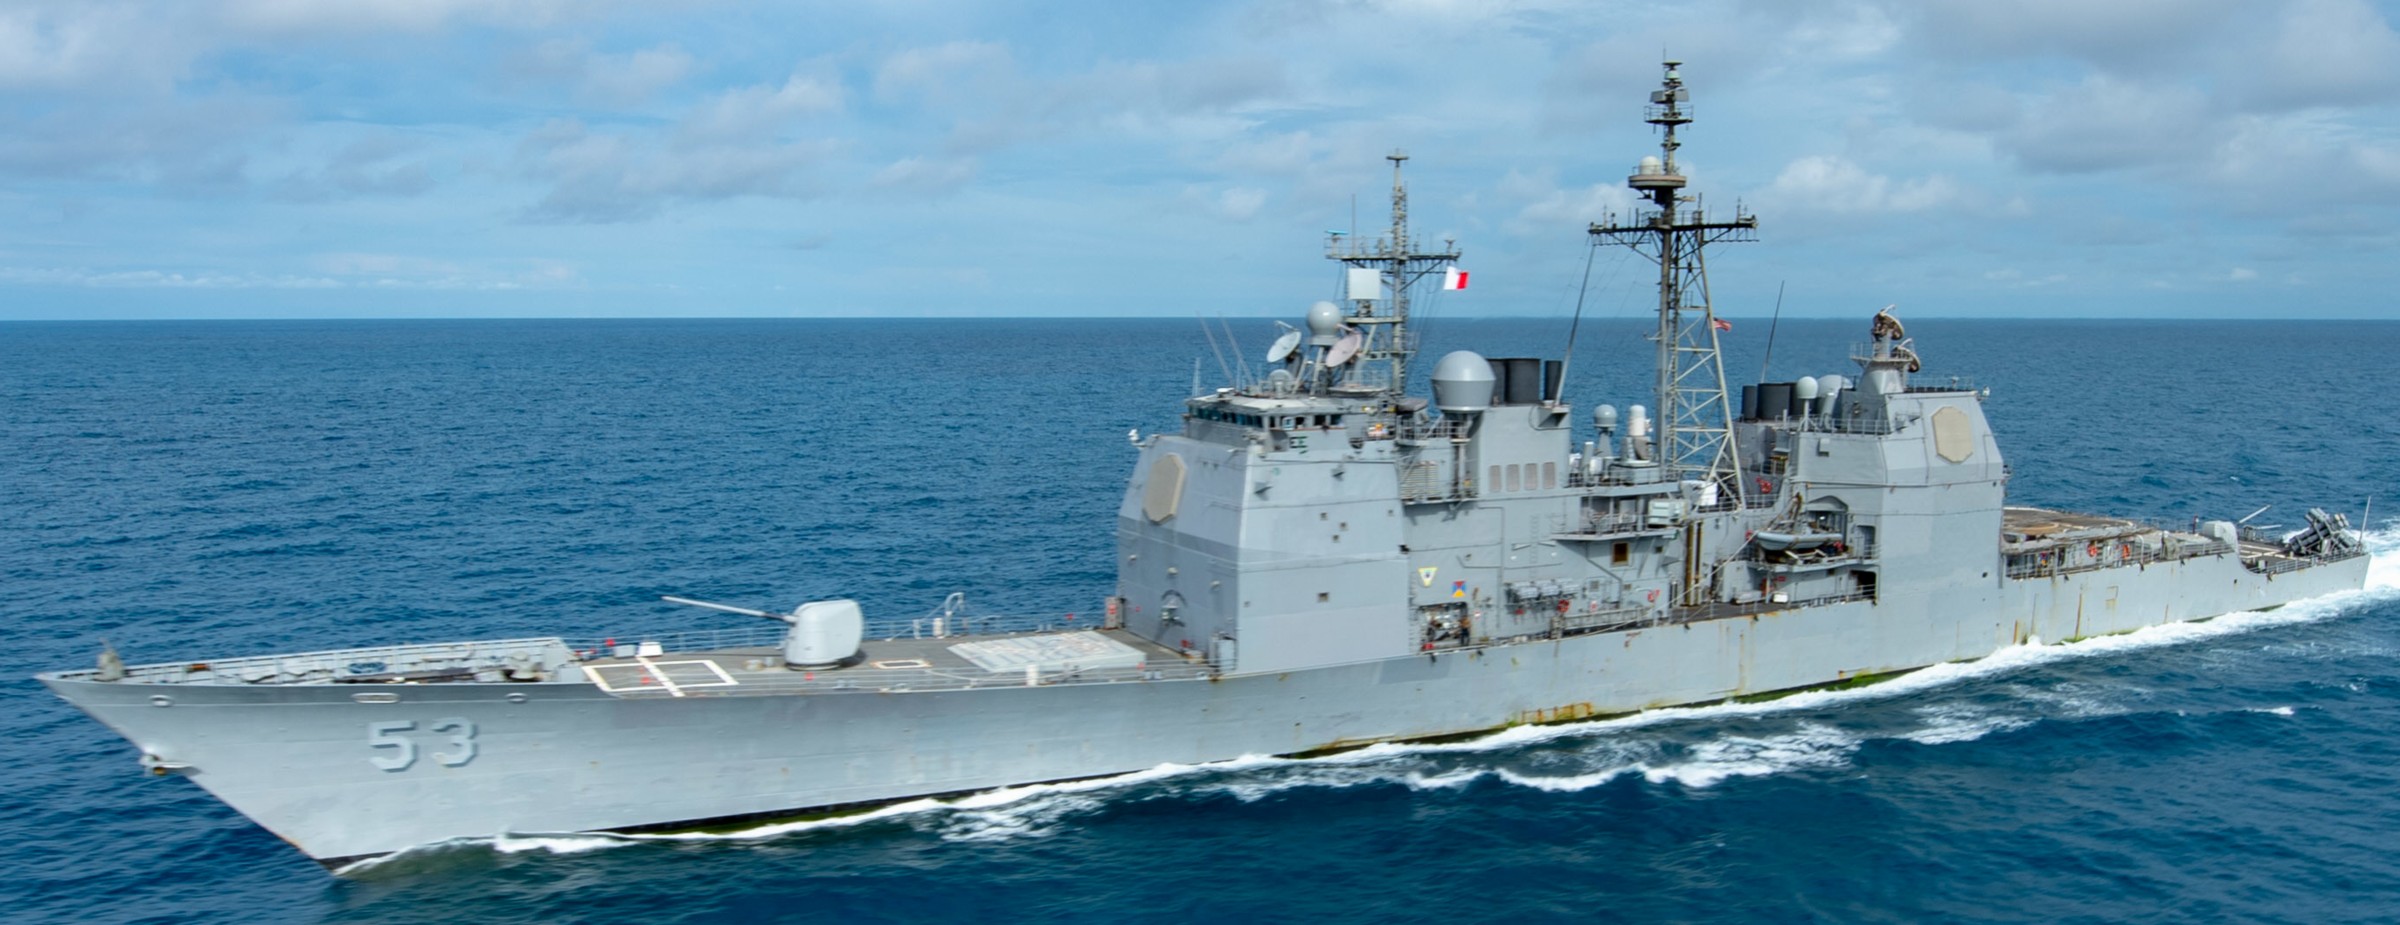 cg-53 uss mobile bay ticonderoga class guided missile cruiser aegis us navy 123